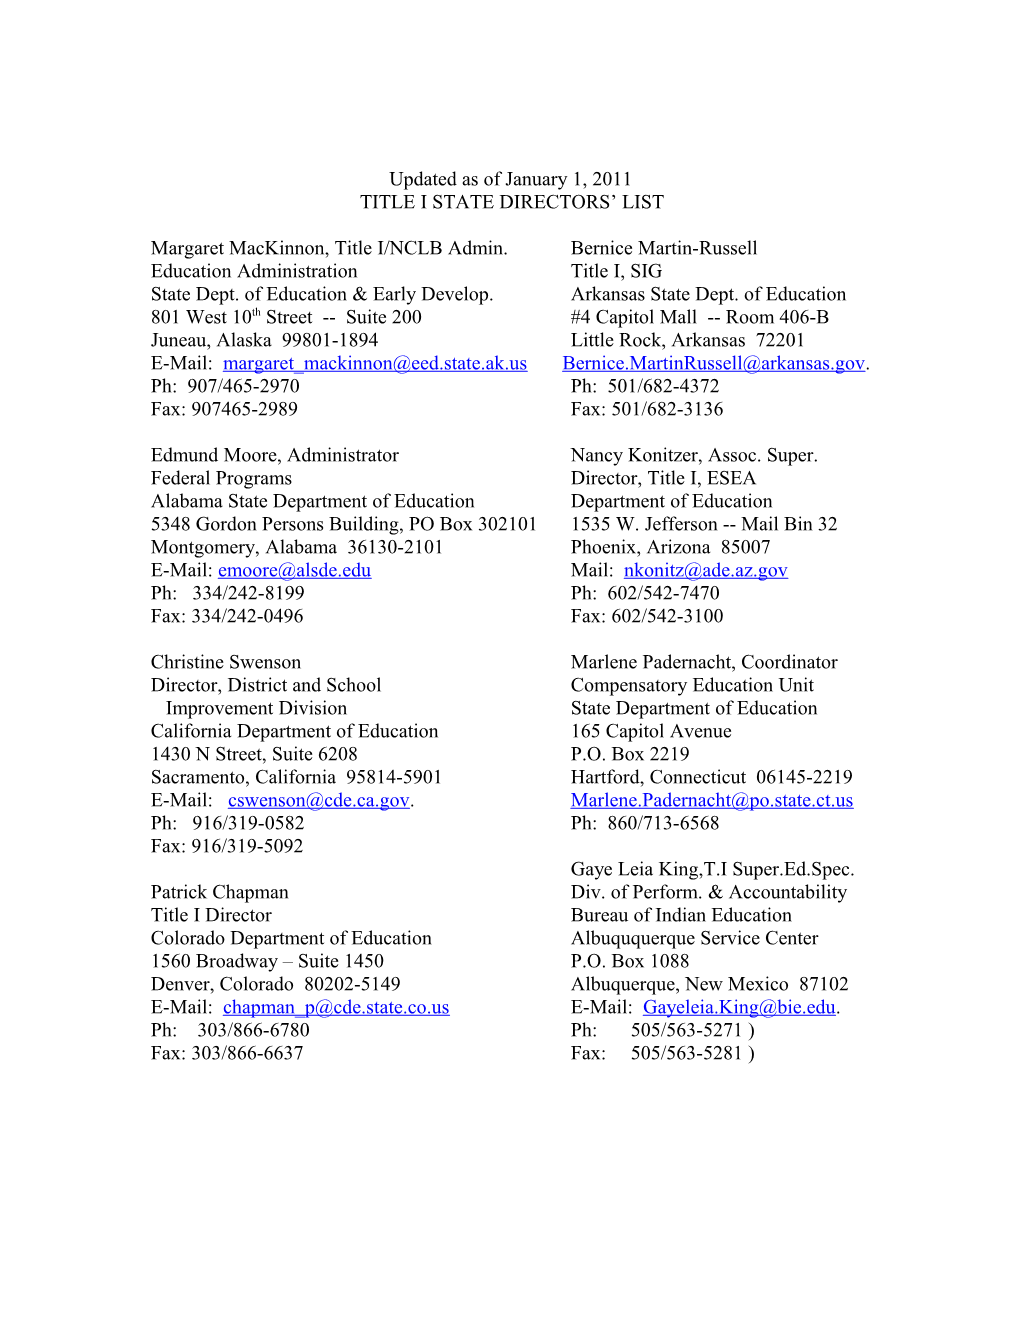 Updated As of January 1, 2011 Title I State Directors' List (MS WORD)